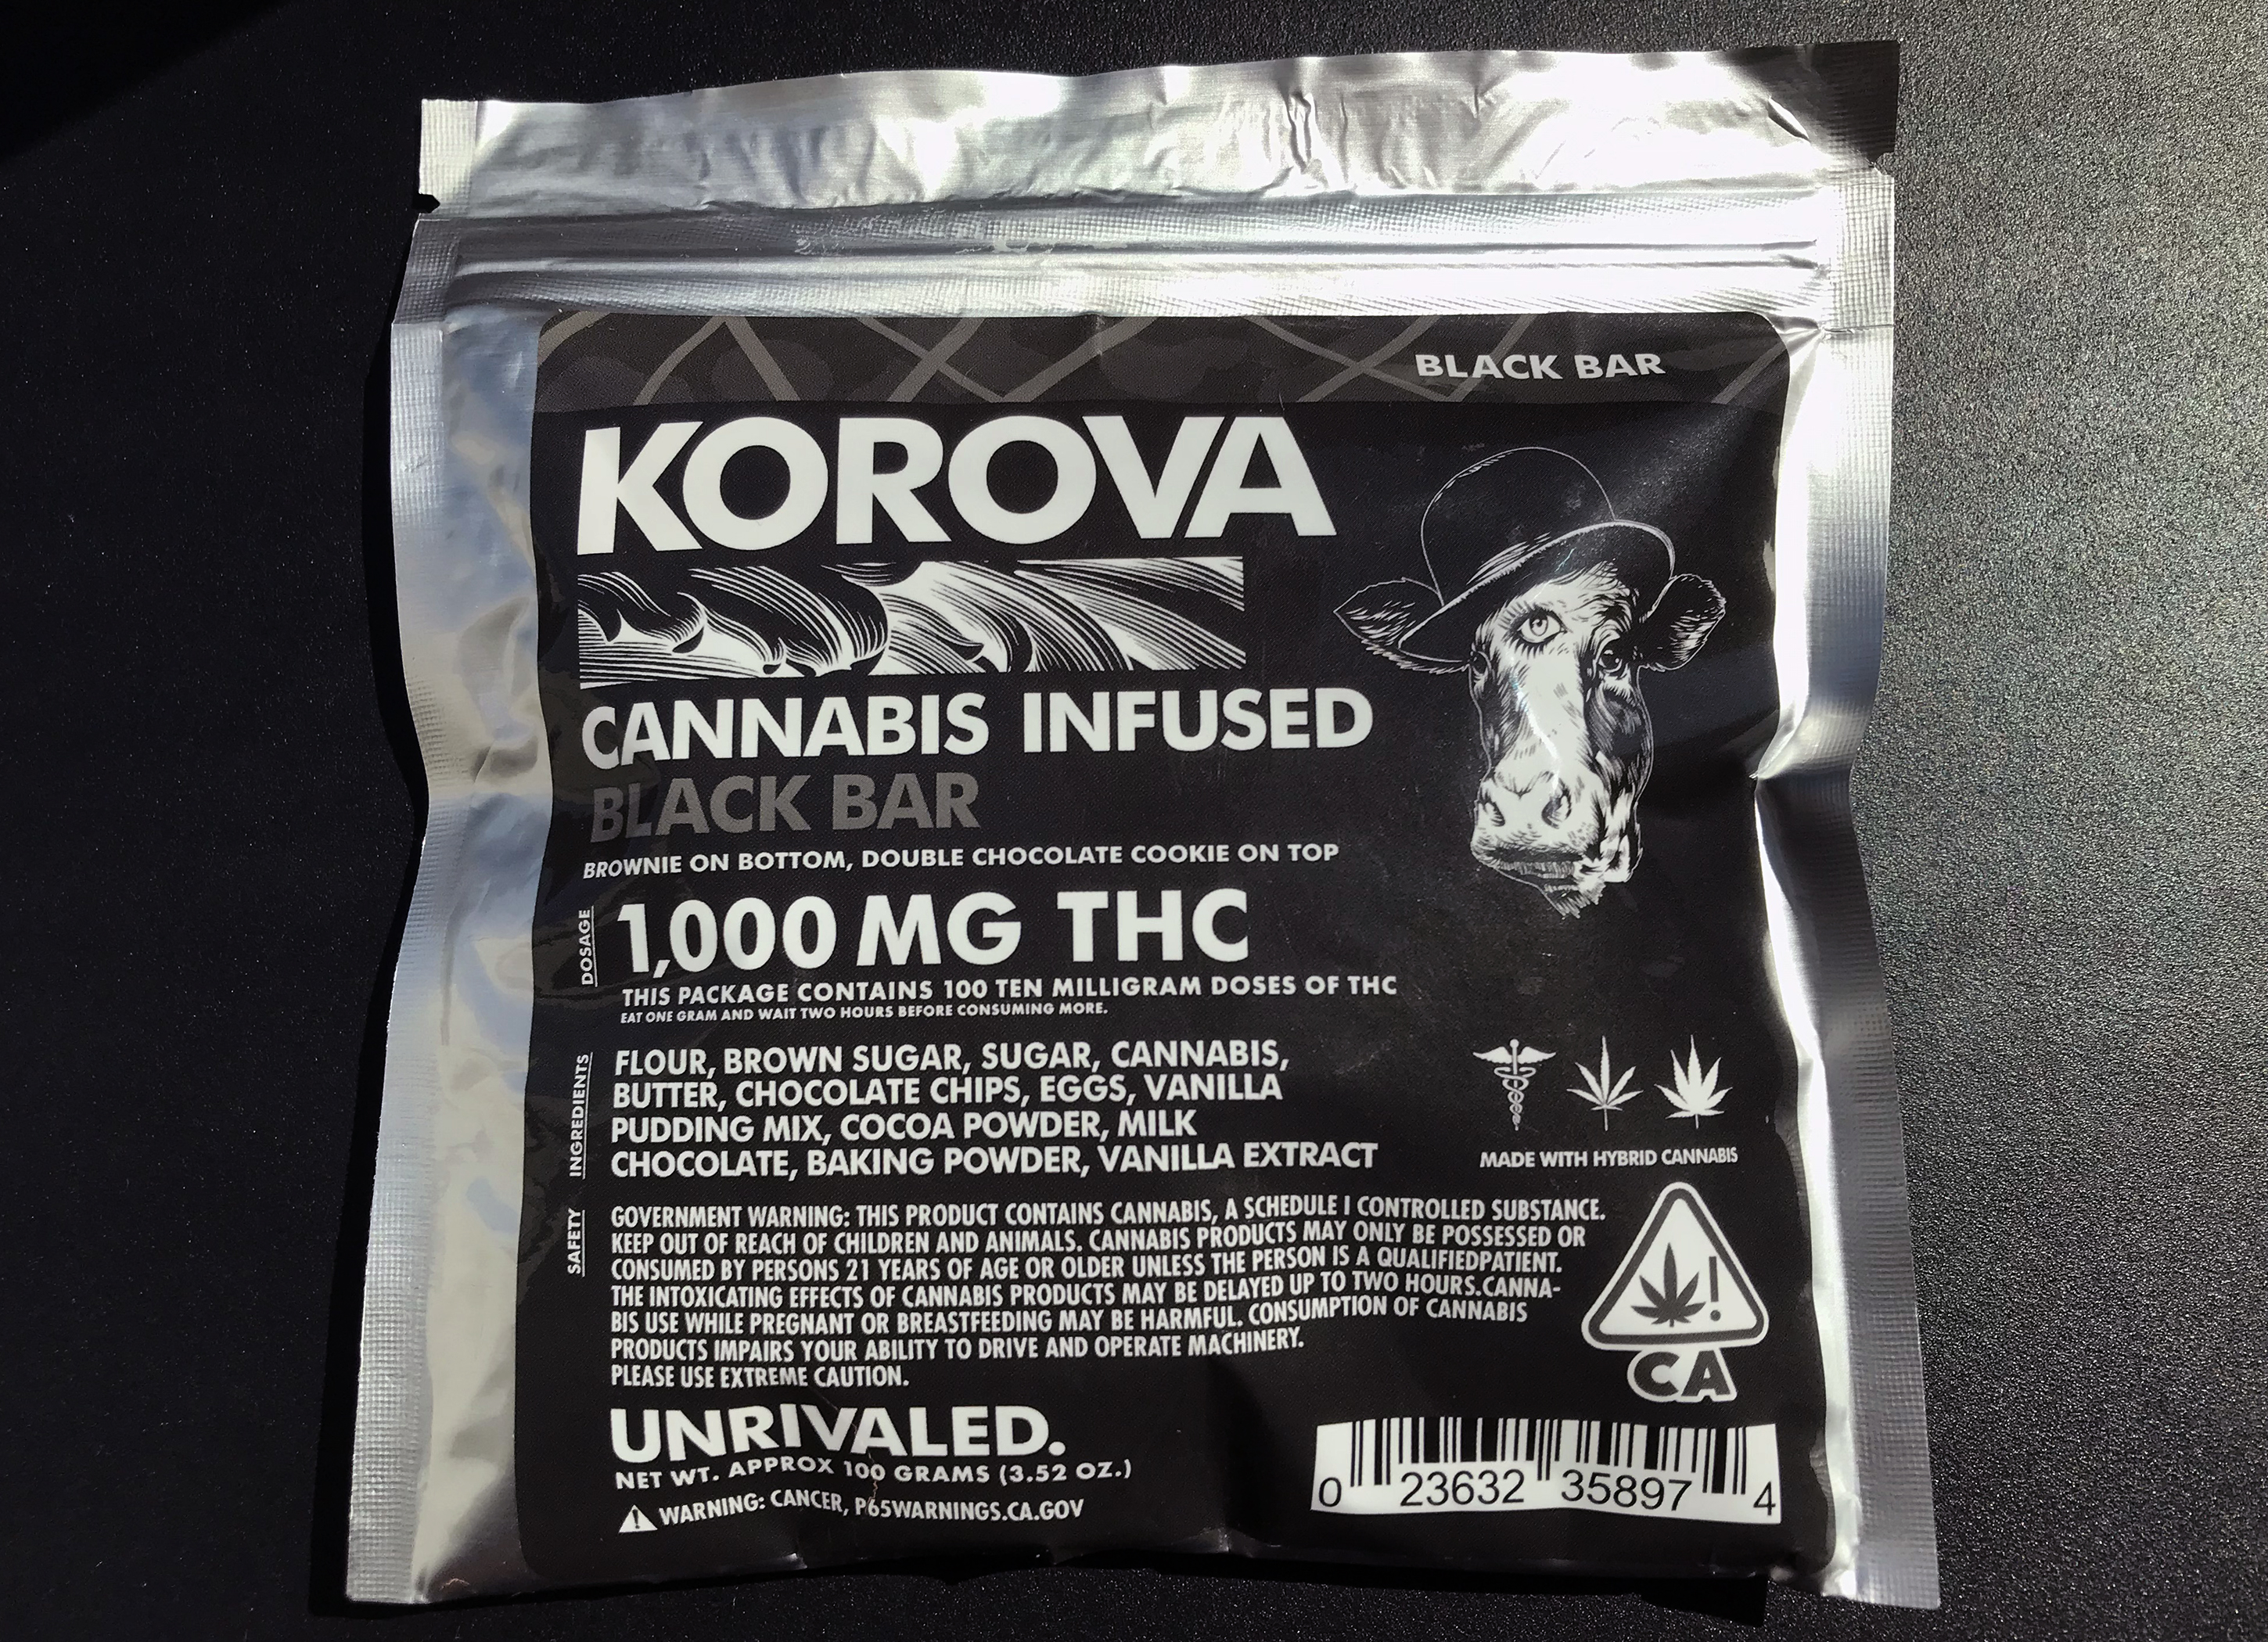 Counterfeit cannabis products stoke black market for California weed